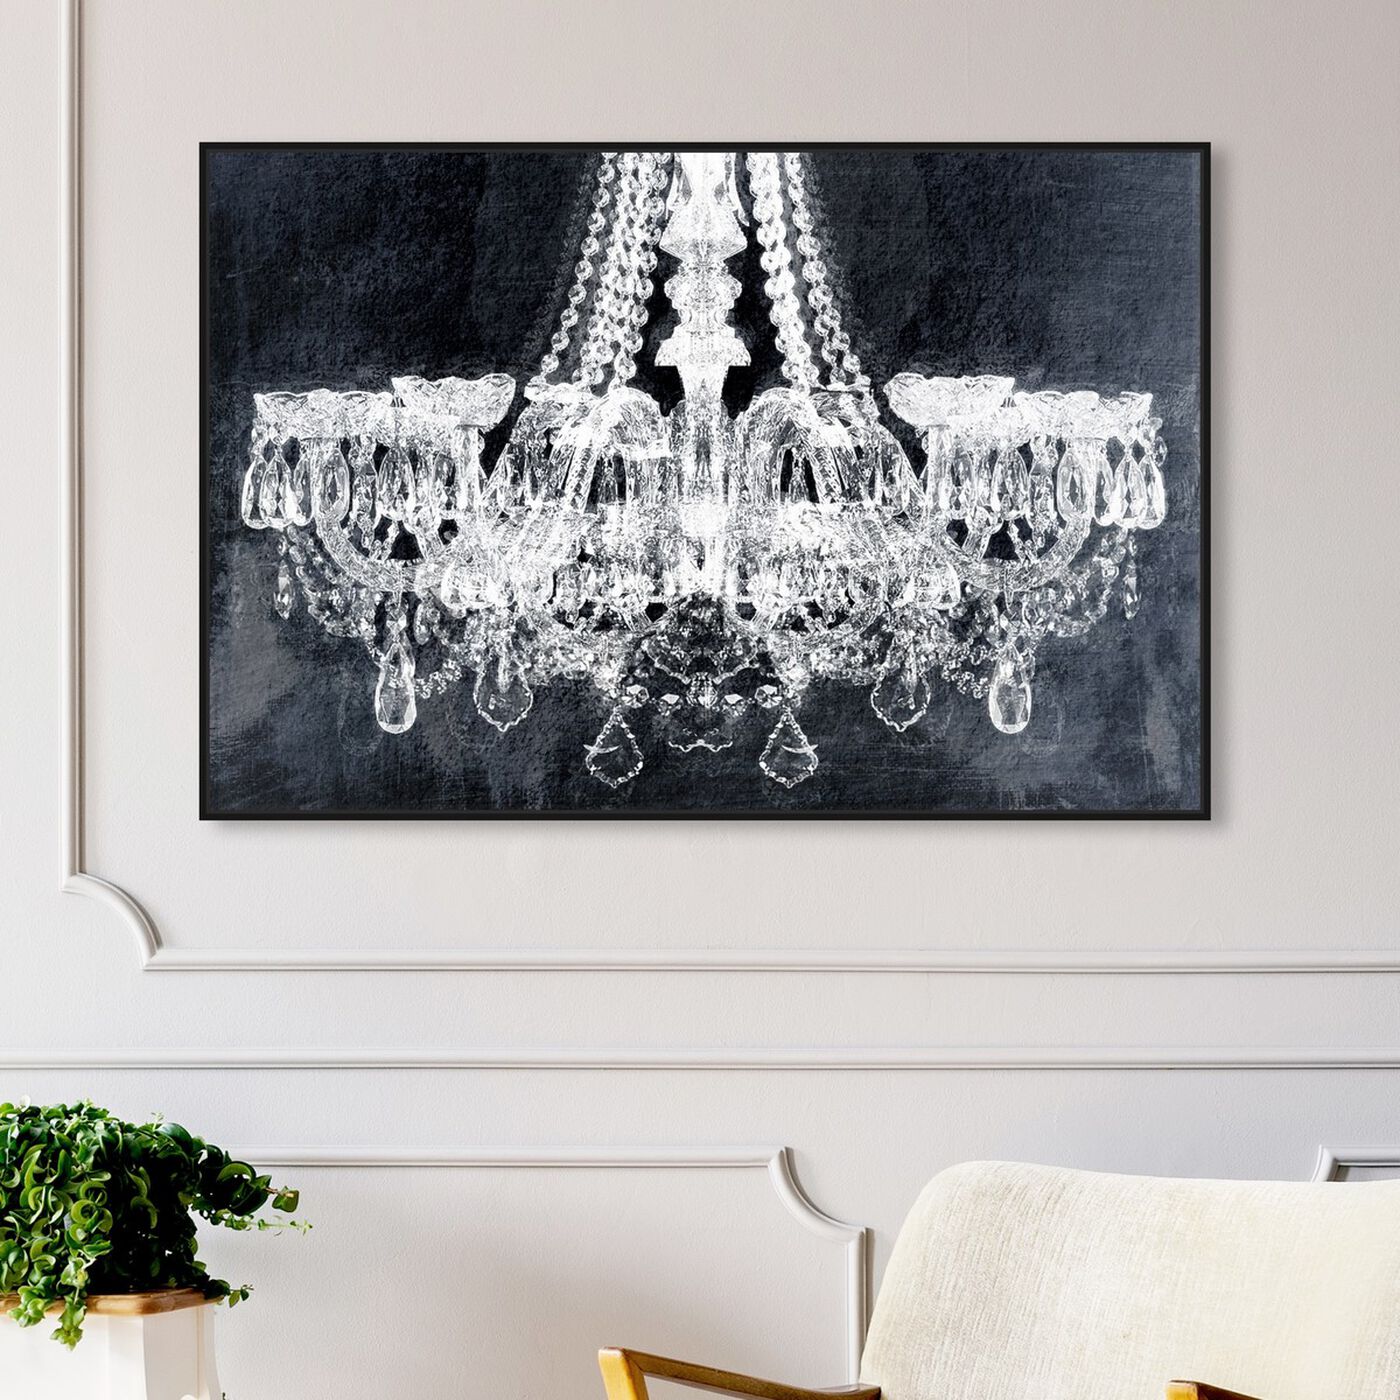 Hanging view of Breakfast At Tiffany's featuring fashion and glam and chandeliers art.